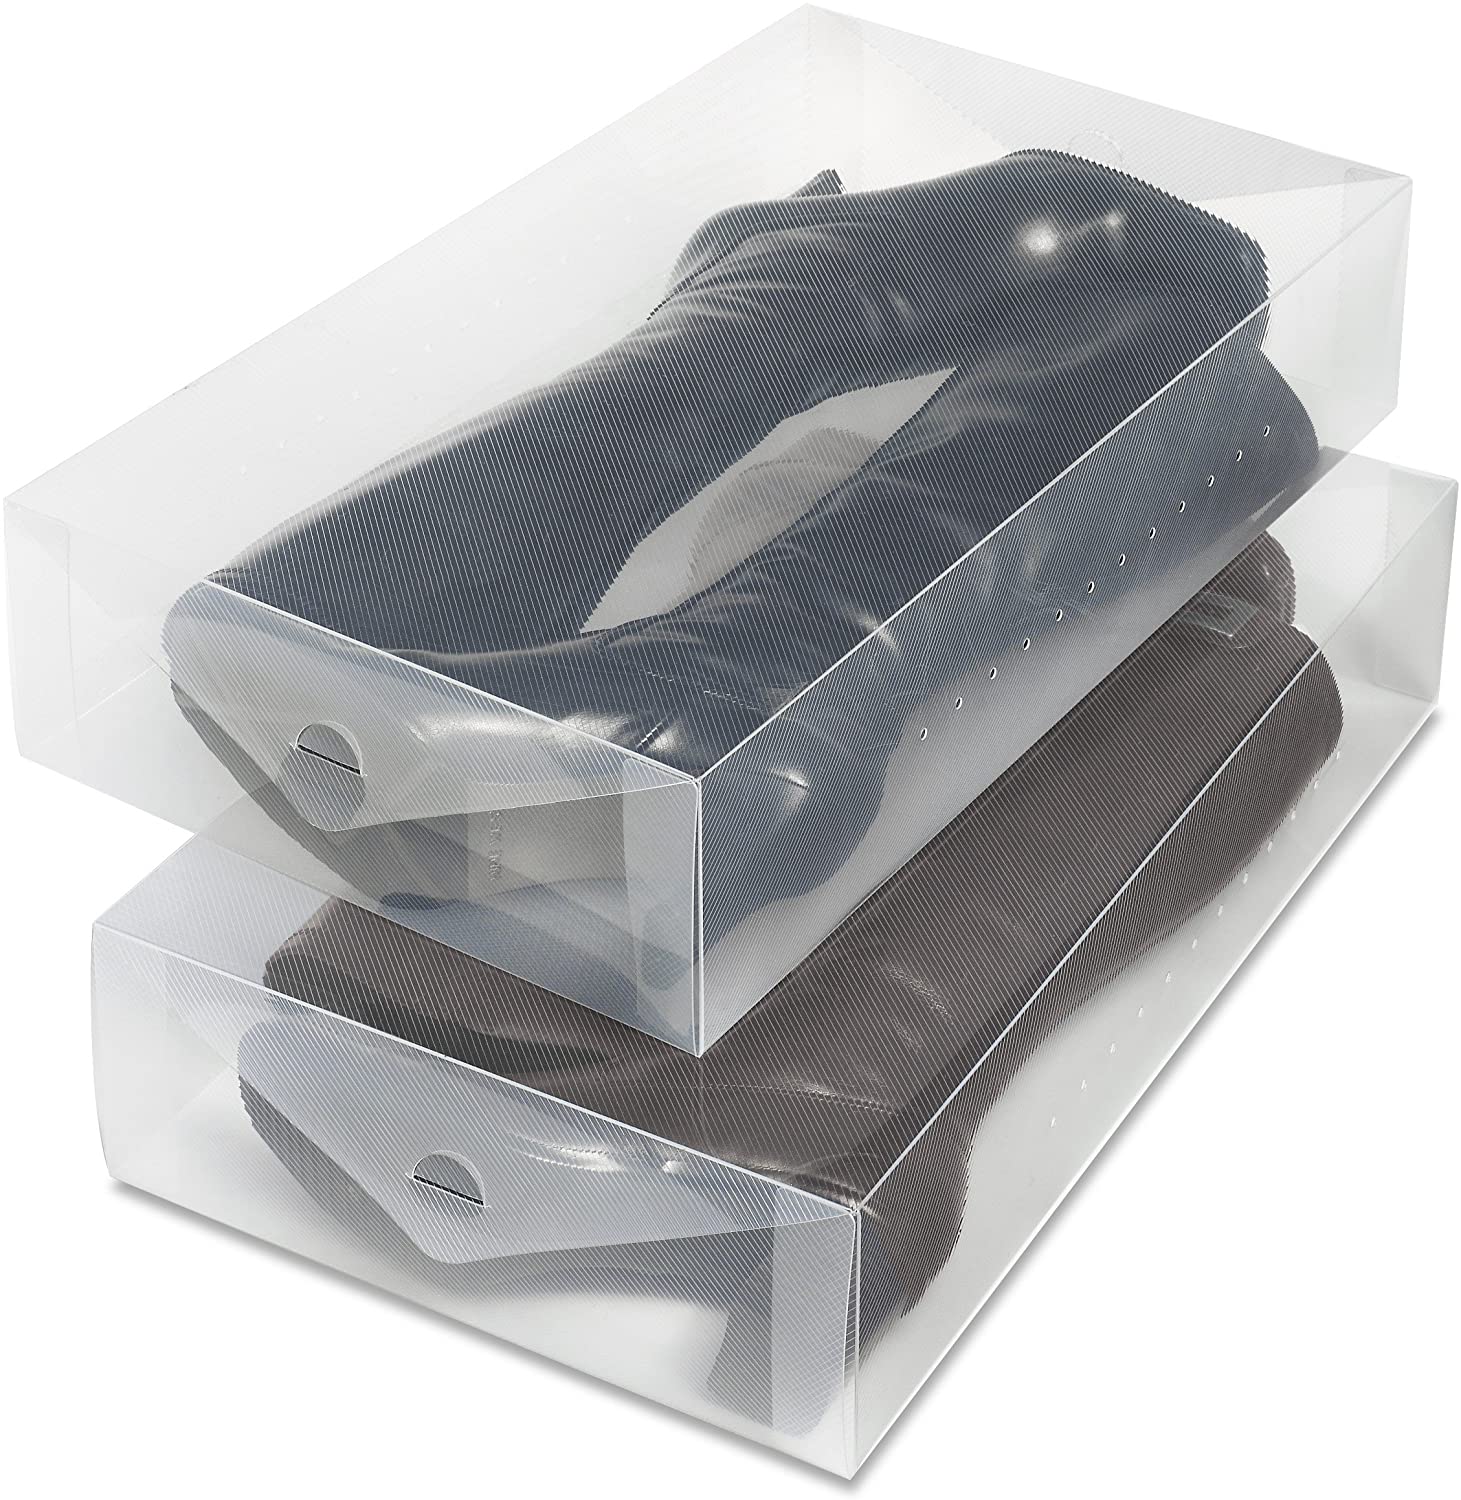 2-Count Whitmor Clear Vue Heavy Duty Stackable Boot Box $3.12 + Free S&H w/ Prime or $25+